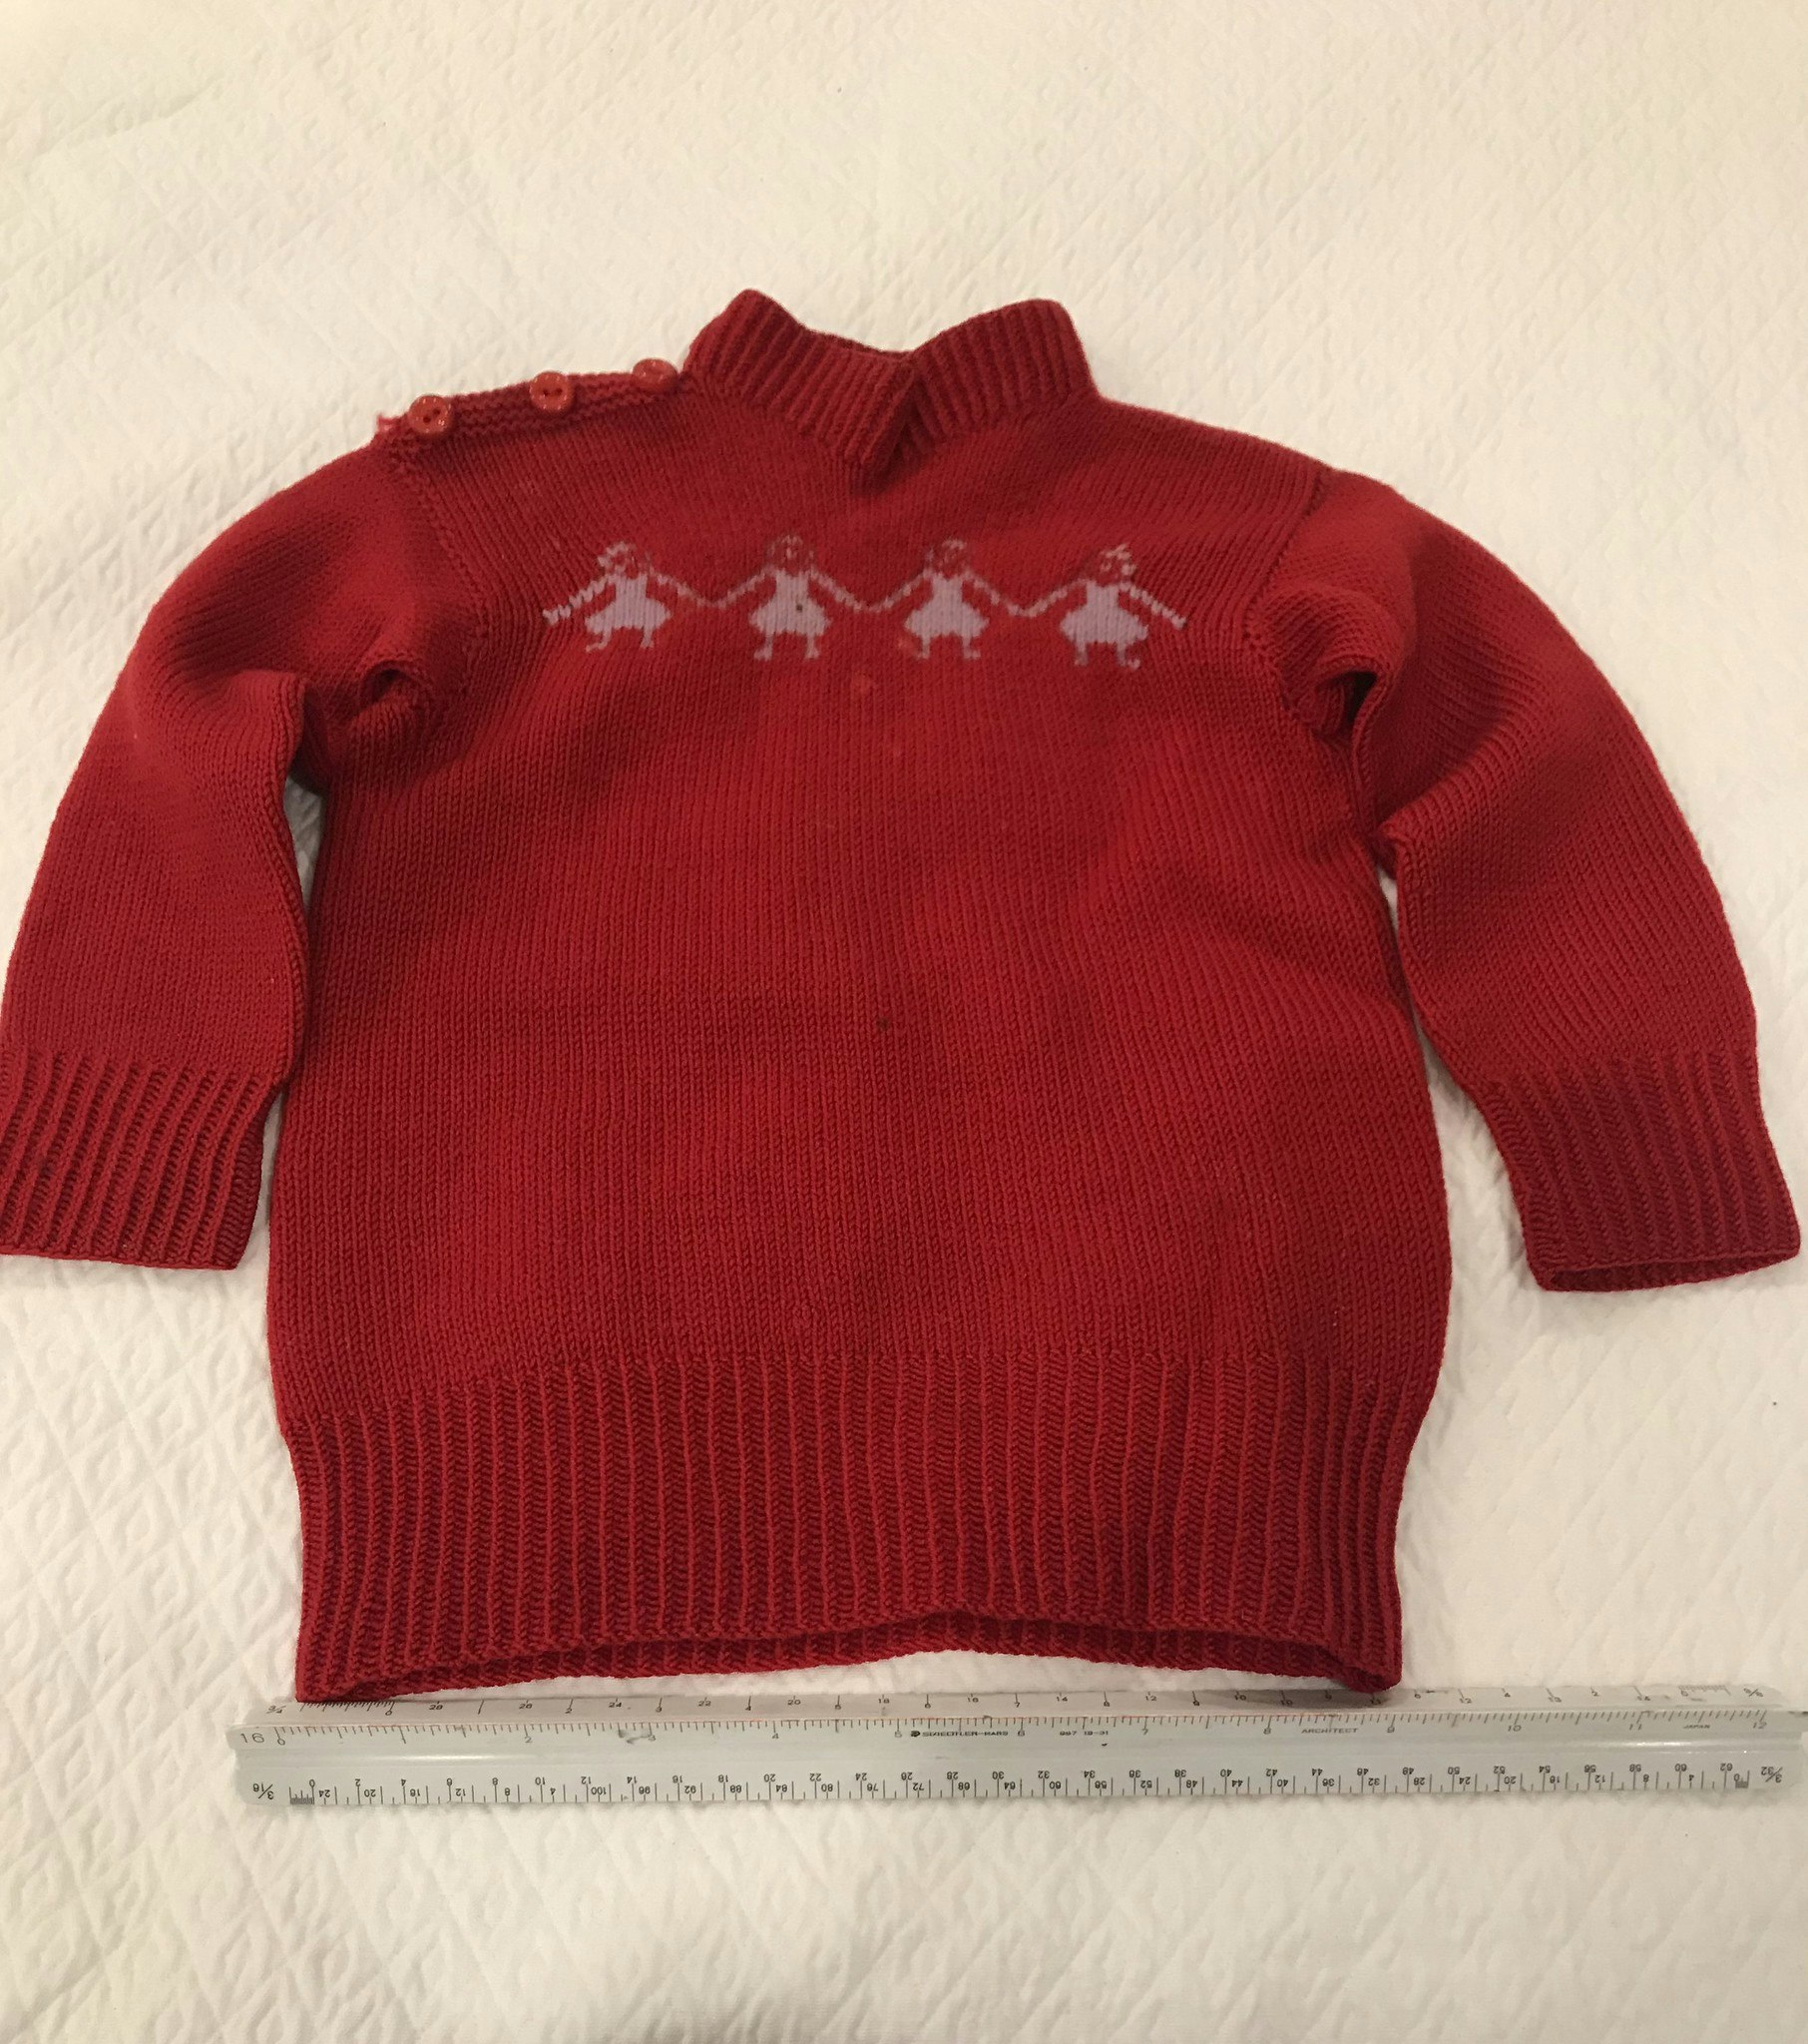 Toddler sized red knit sweater with 4 girls holding hands